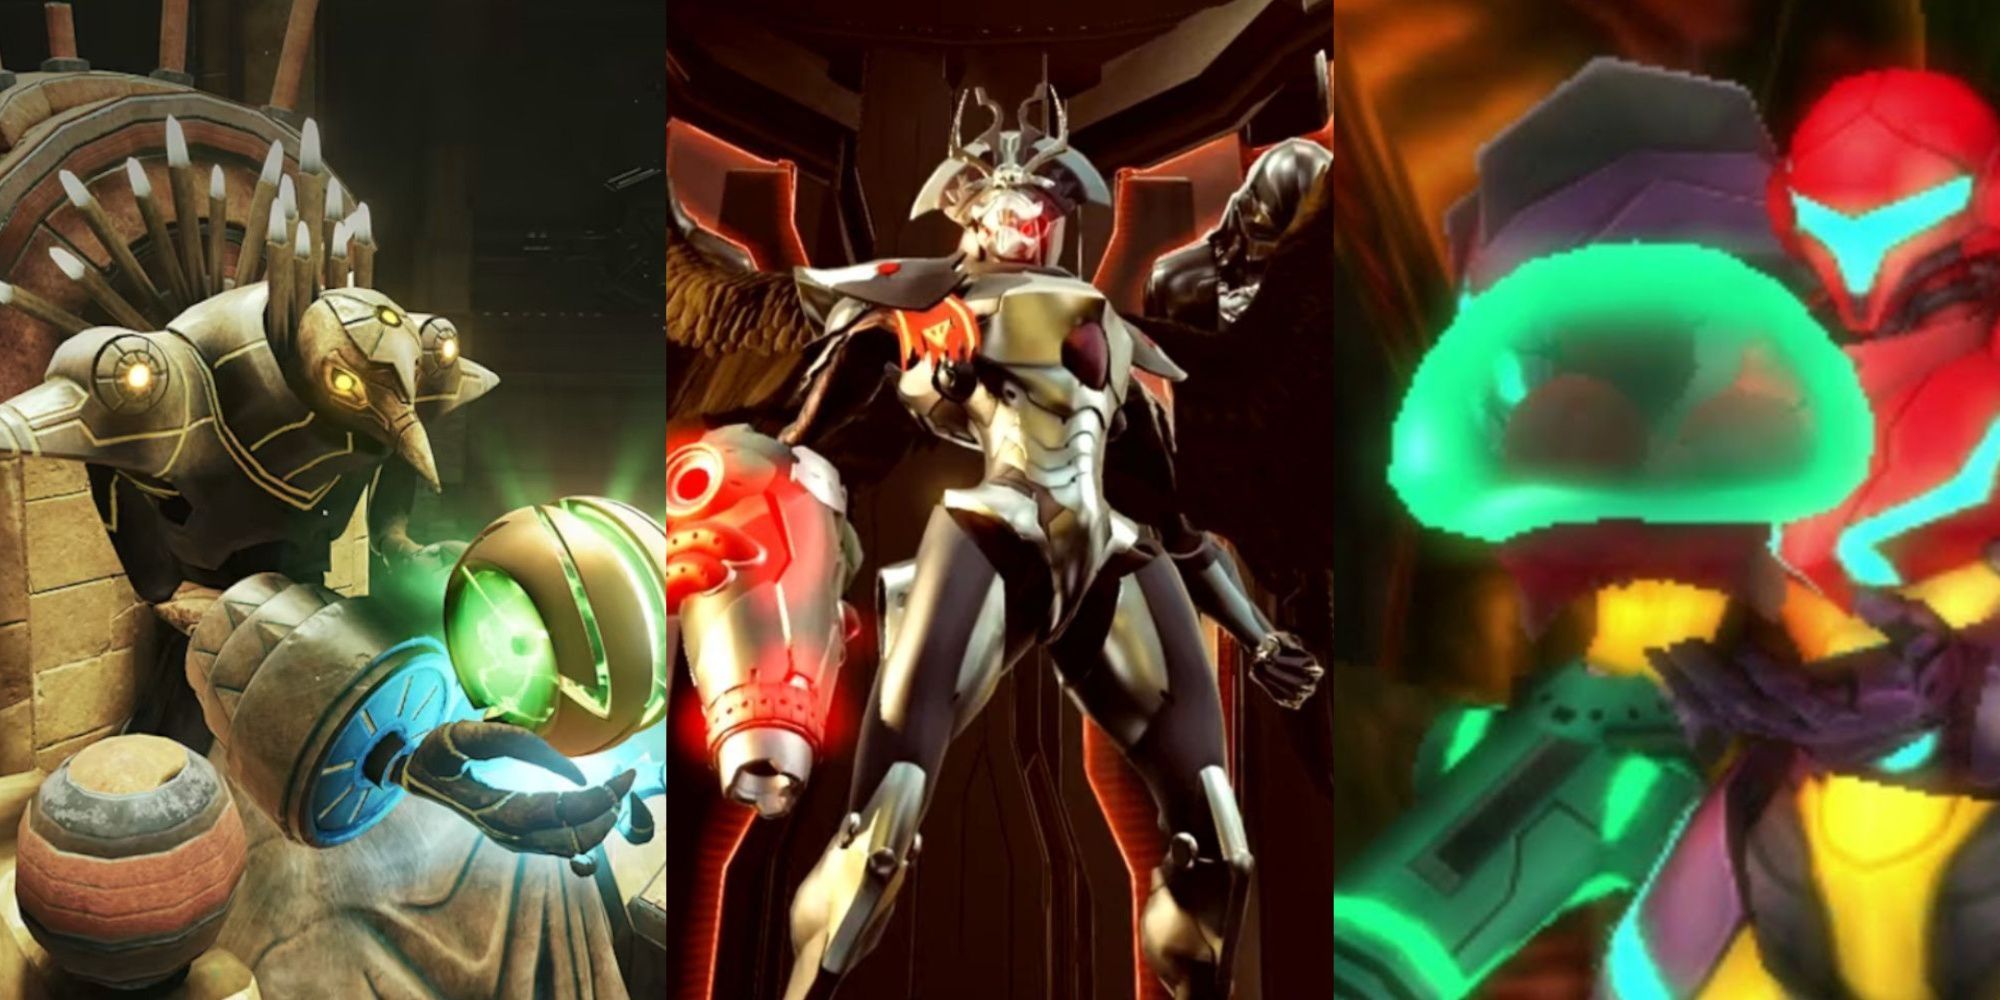 Metroid Prime Samus in morph ball form in the arms of a Chozo staute, Raven Beak from Metroid Dread with his wings spread out, and Samus holding the baby metroid in Samus Returns, left to right